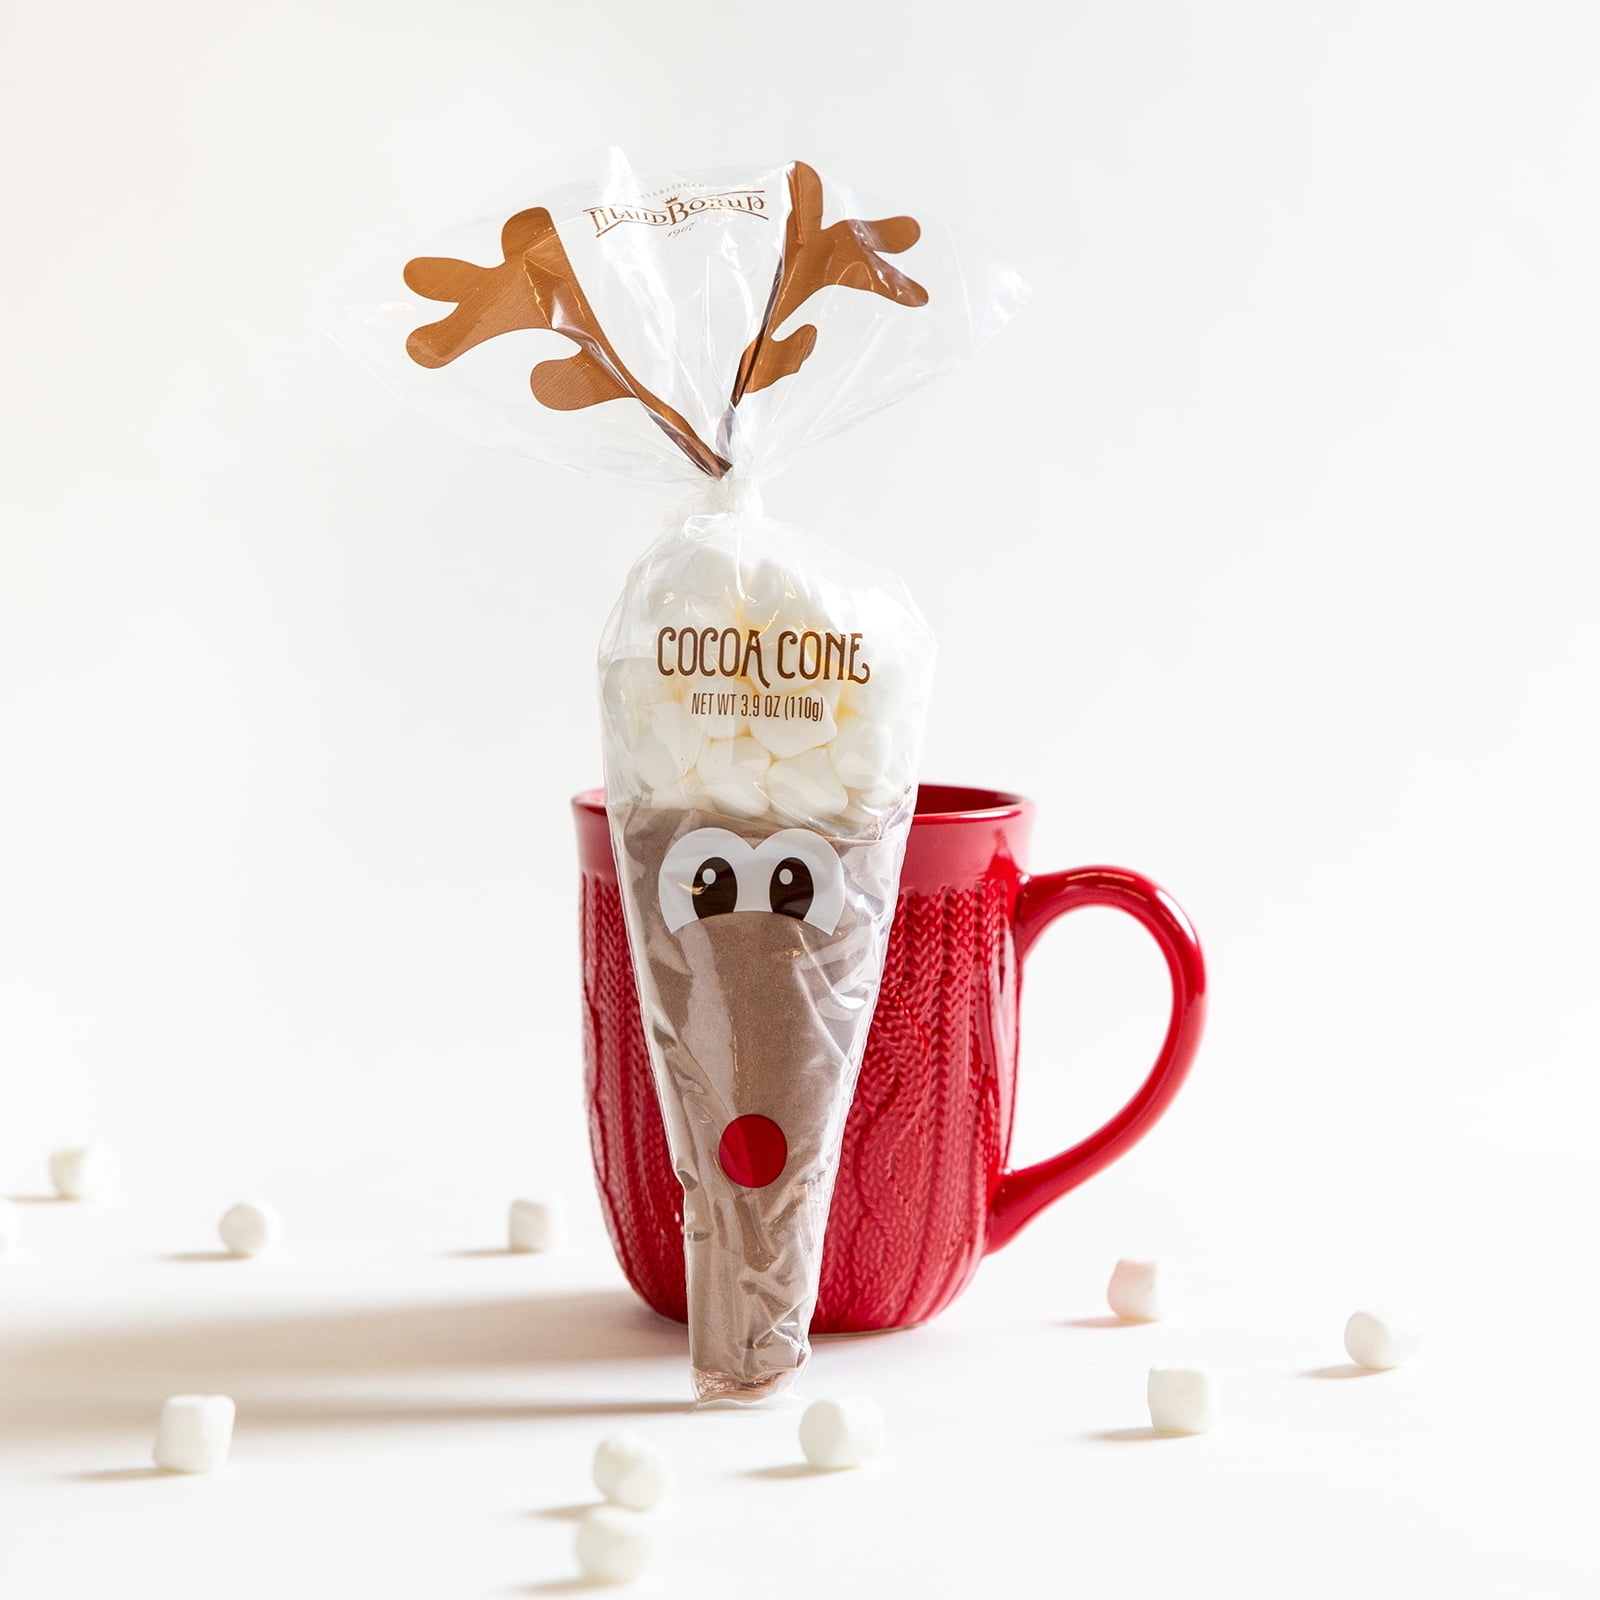 hot cocoa mix in a cellophane cone shaped bag with a reindeer face on it